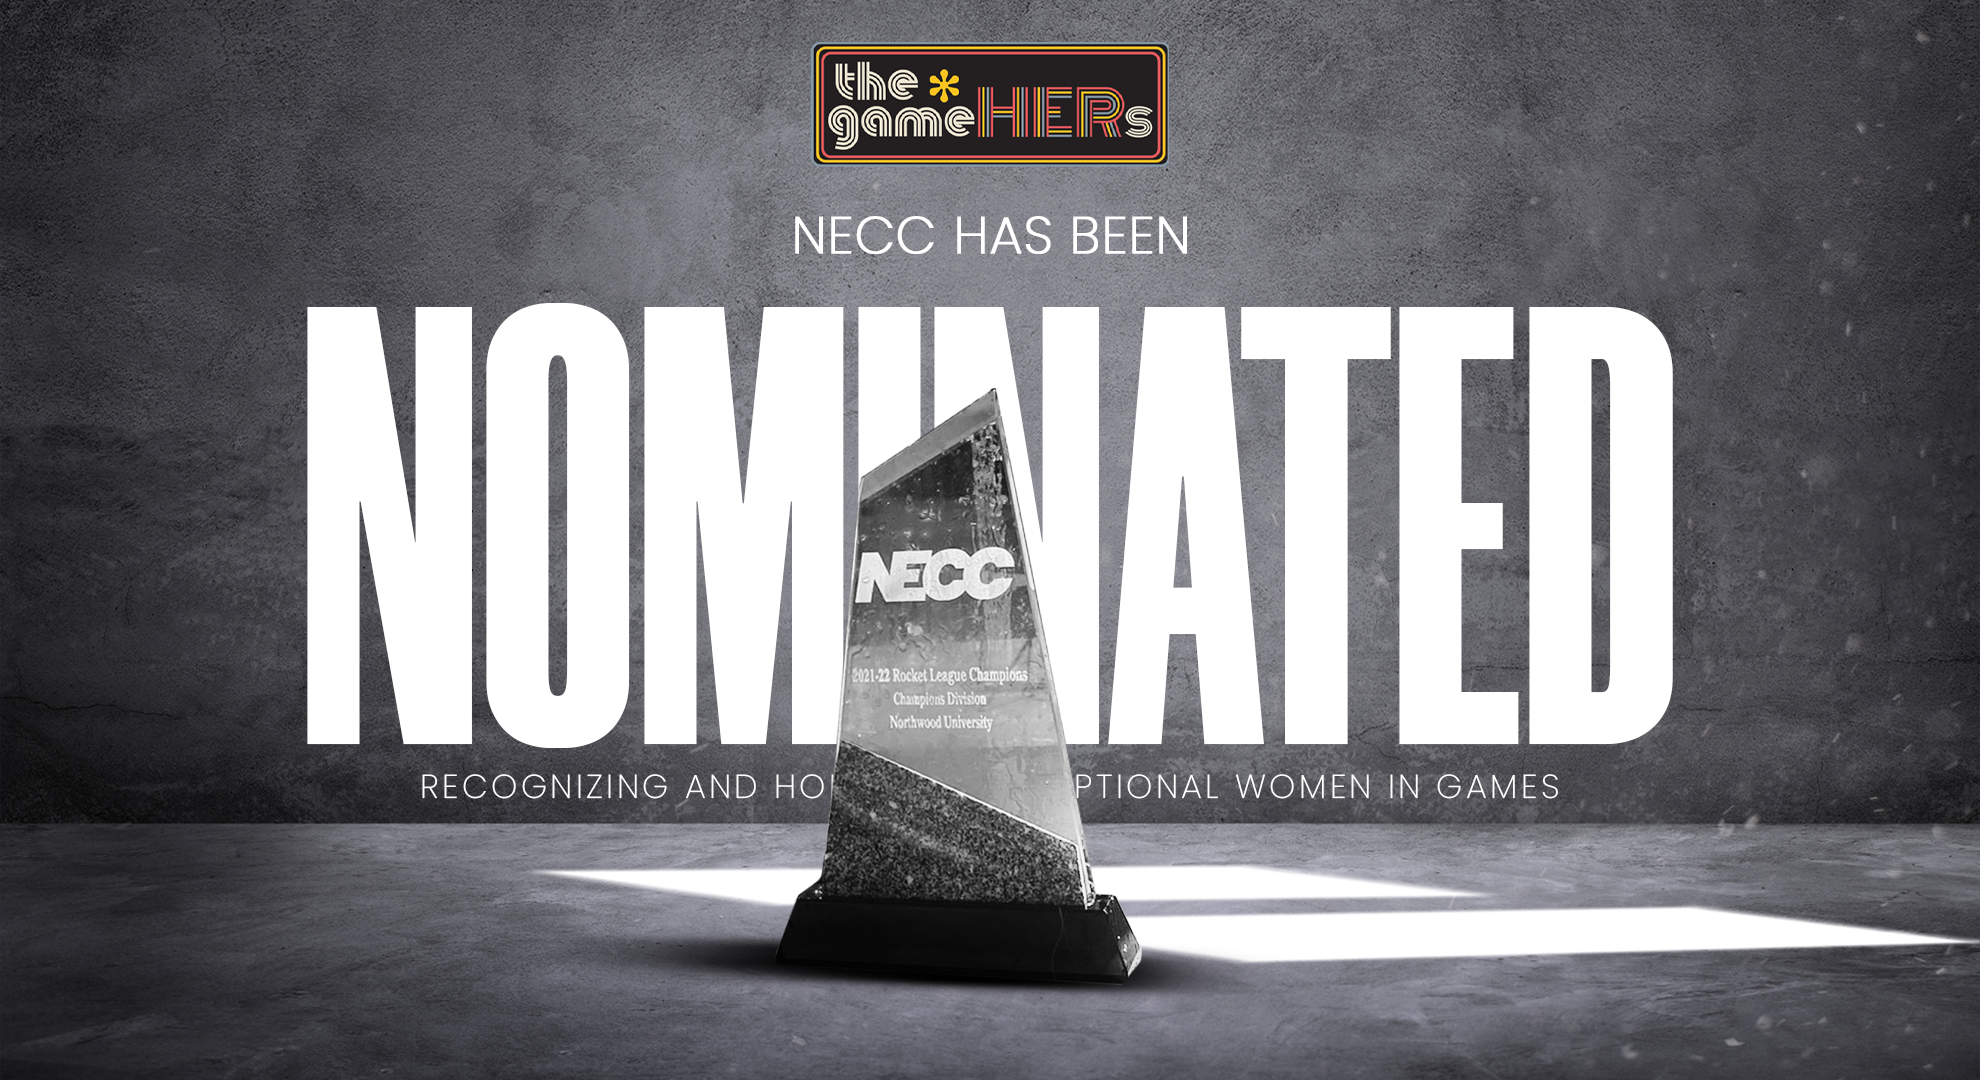 NECC Nominated for Best Collegiate Organization by the GameHERS